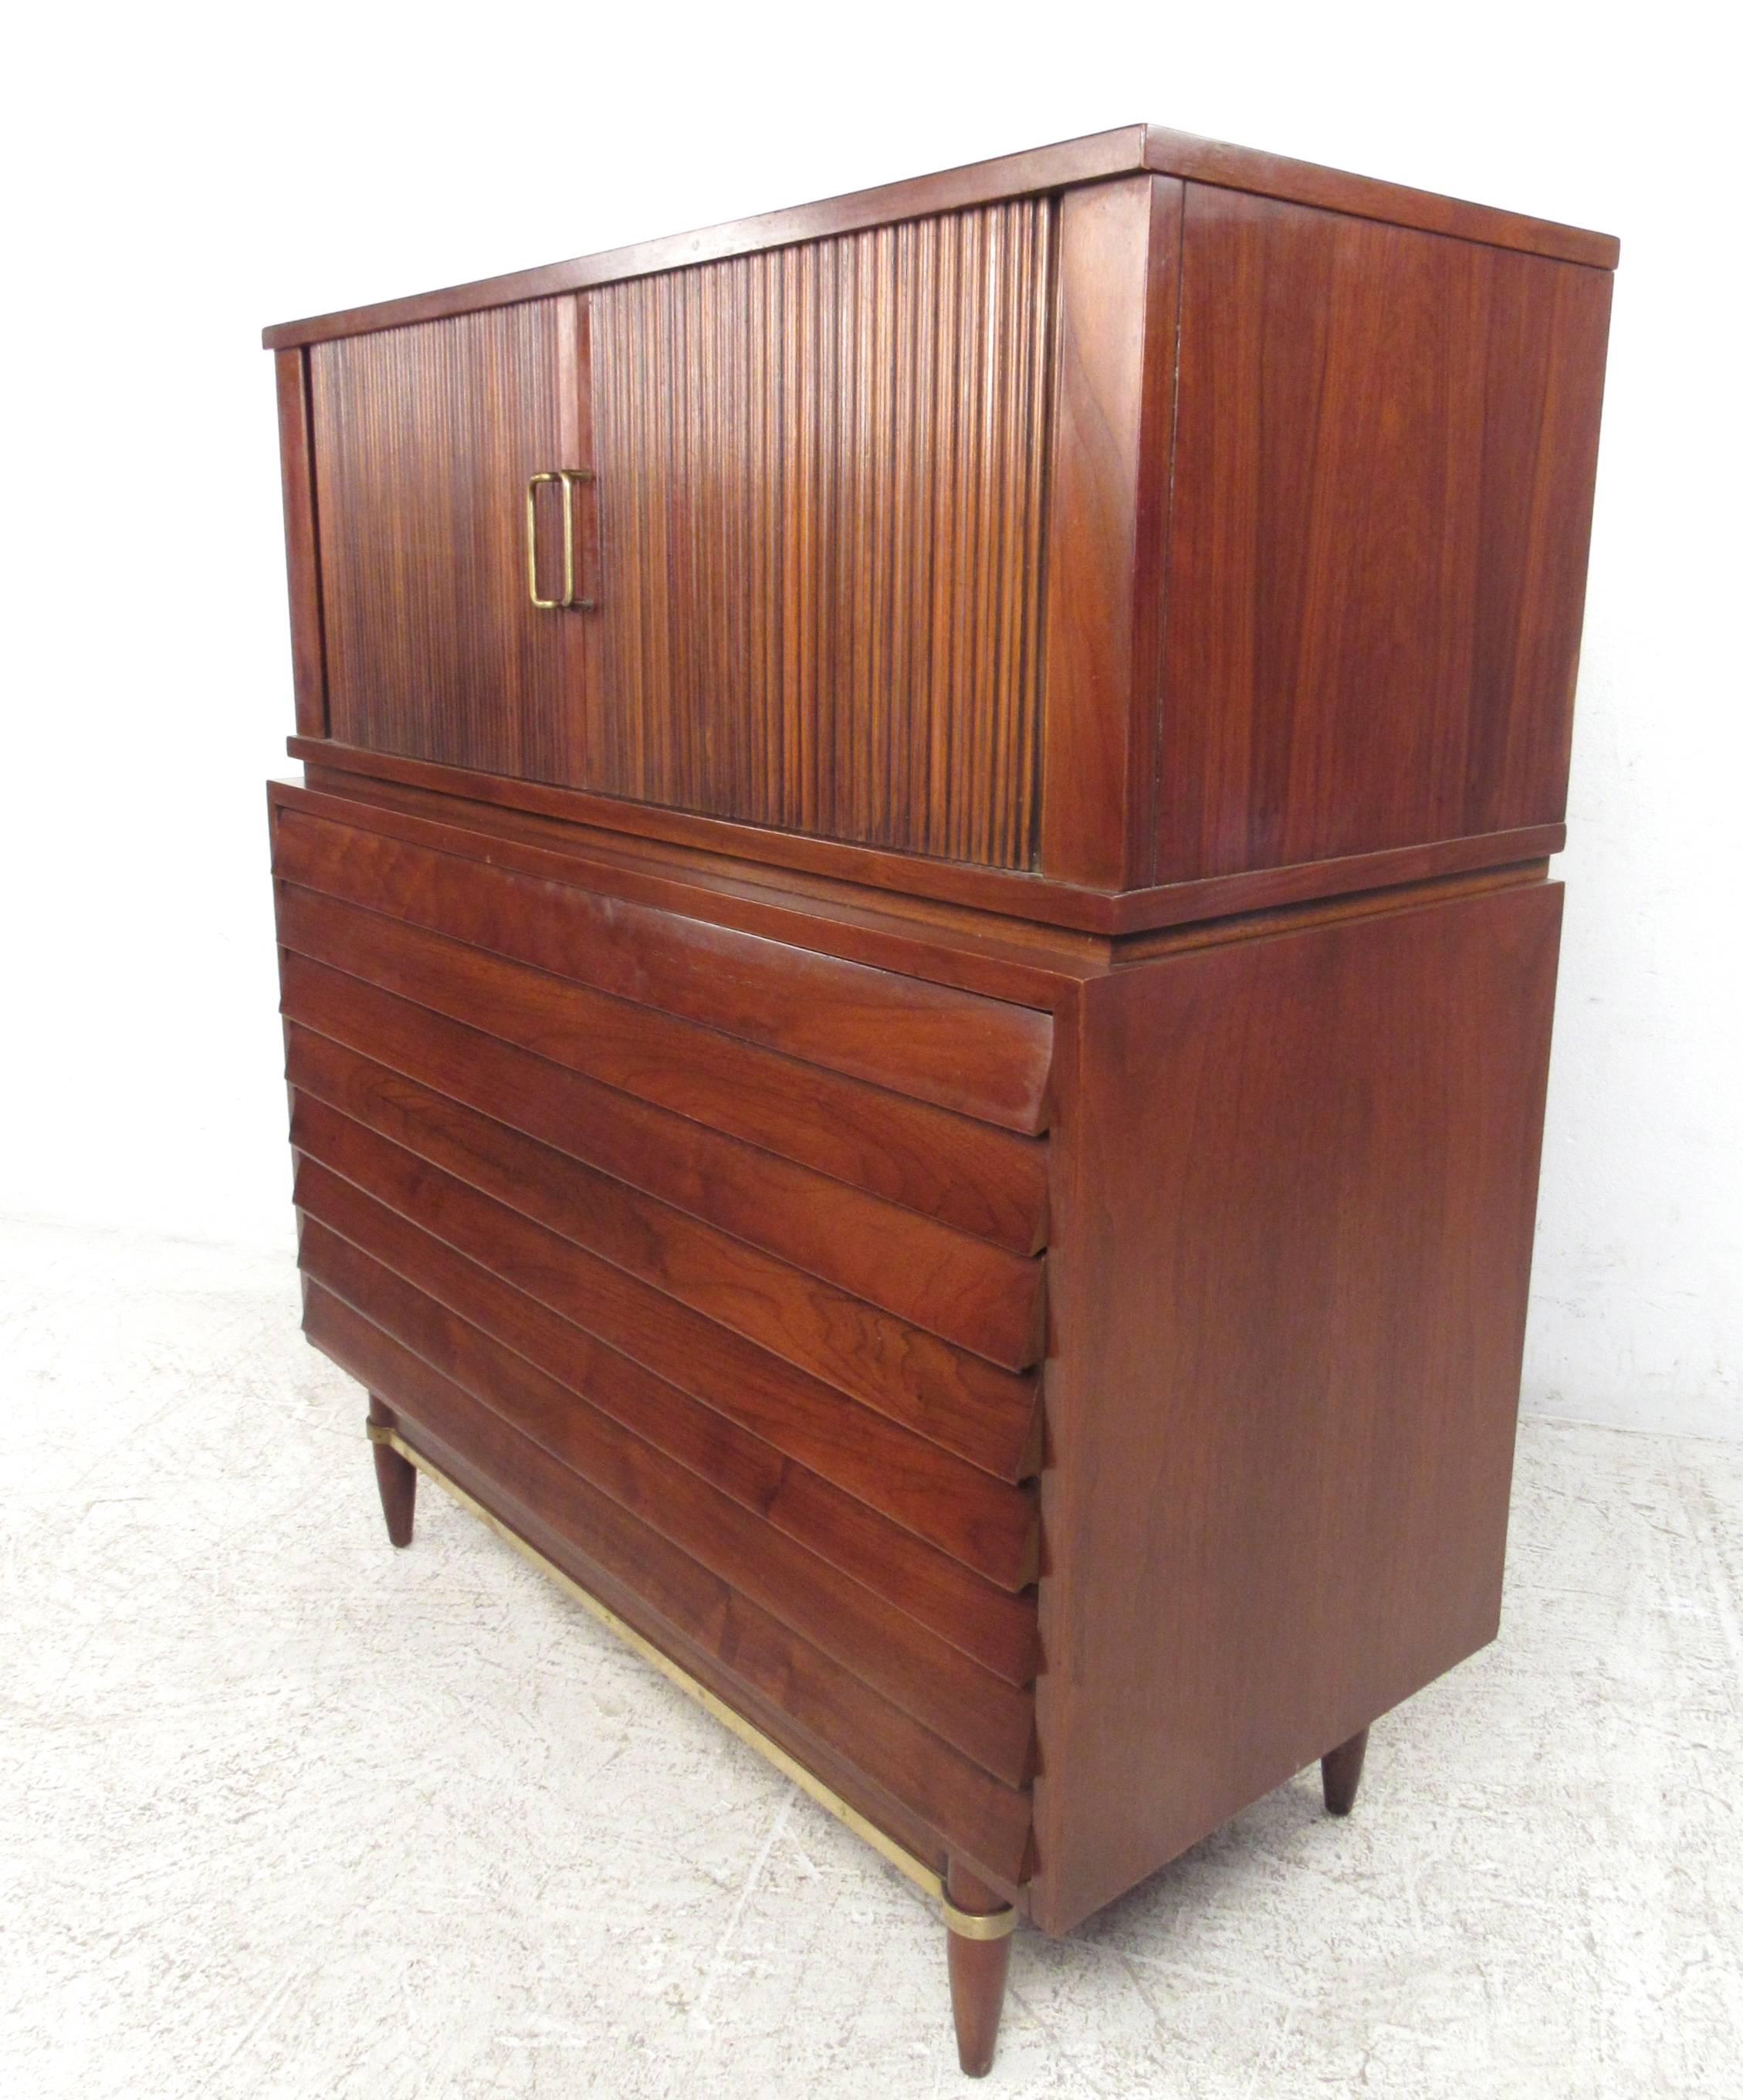 This Mid-Century Modern walnut highboy dresser features truly unique vintage design details, including louvered front drawers, horizontal tambour doors, and brass trim stretchers. This stunning dresser features five spacious drawers for organization